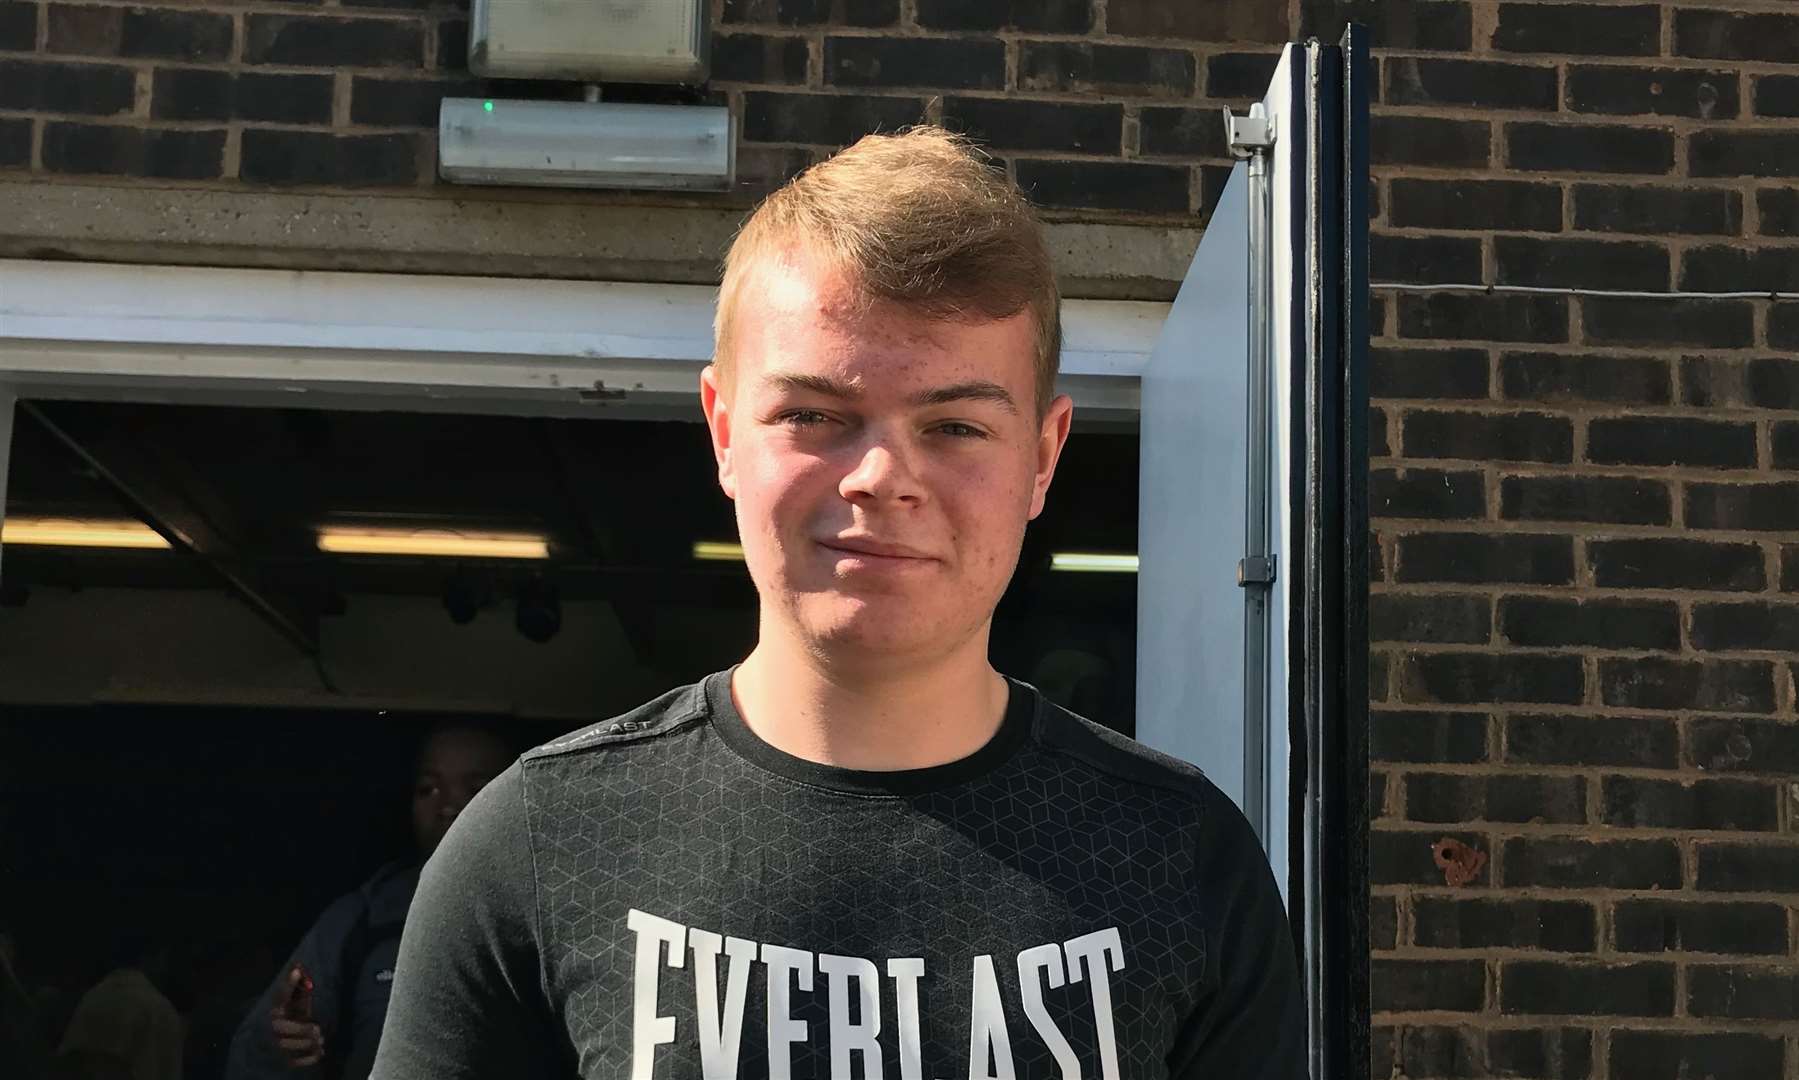 Calder Grant battled back, after being knocked down in an alleged hit-and-run, to finish his GCSEs